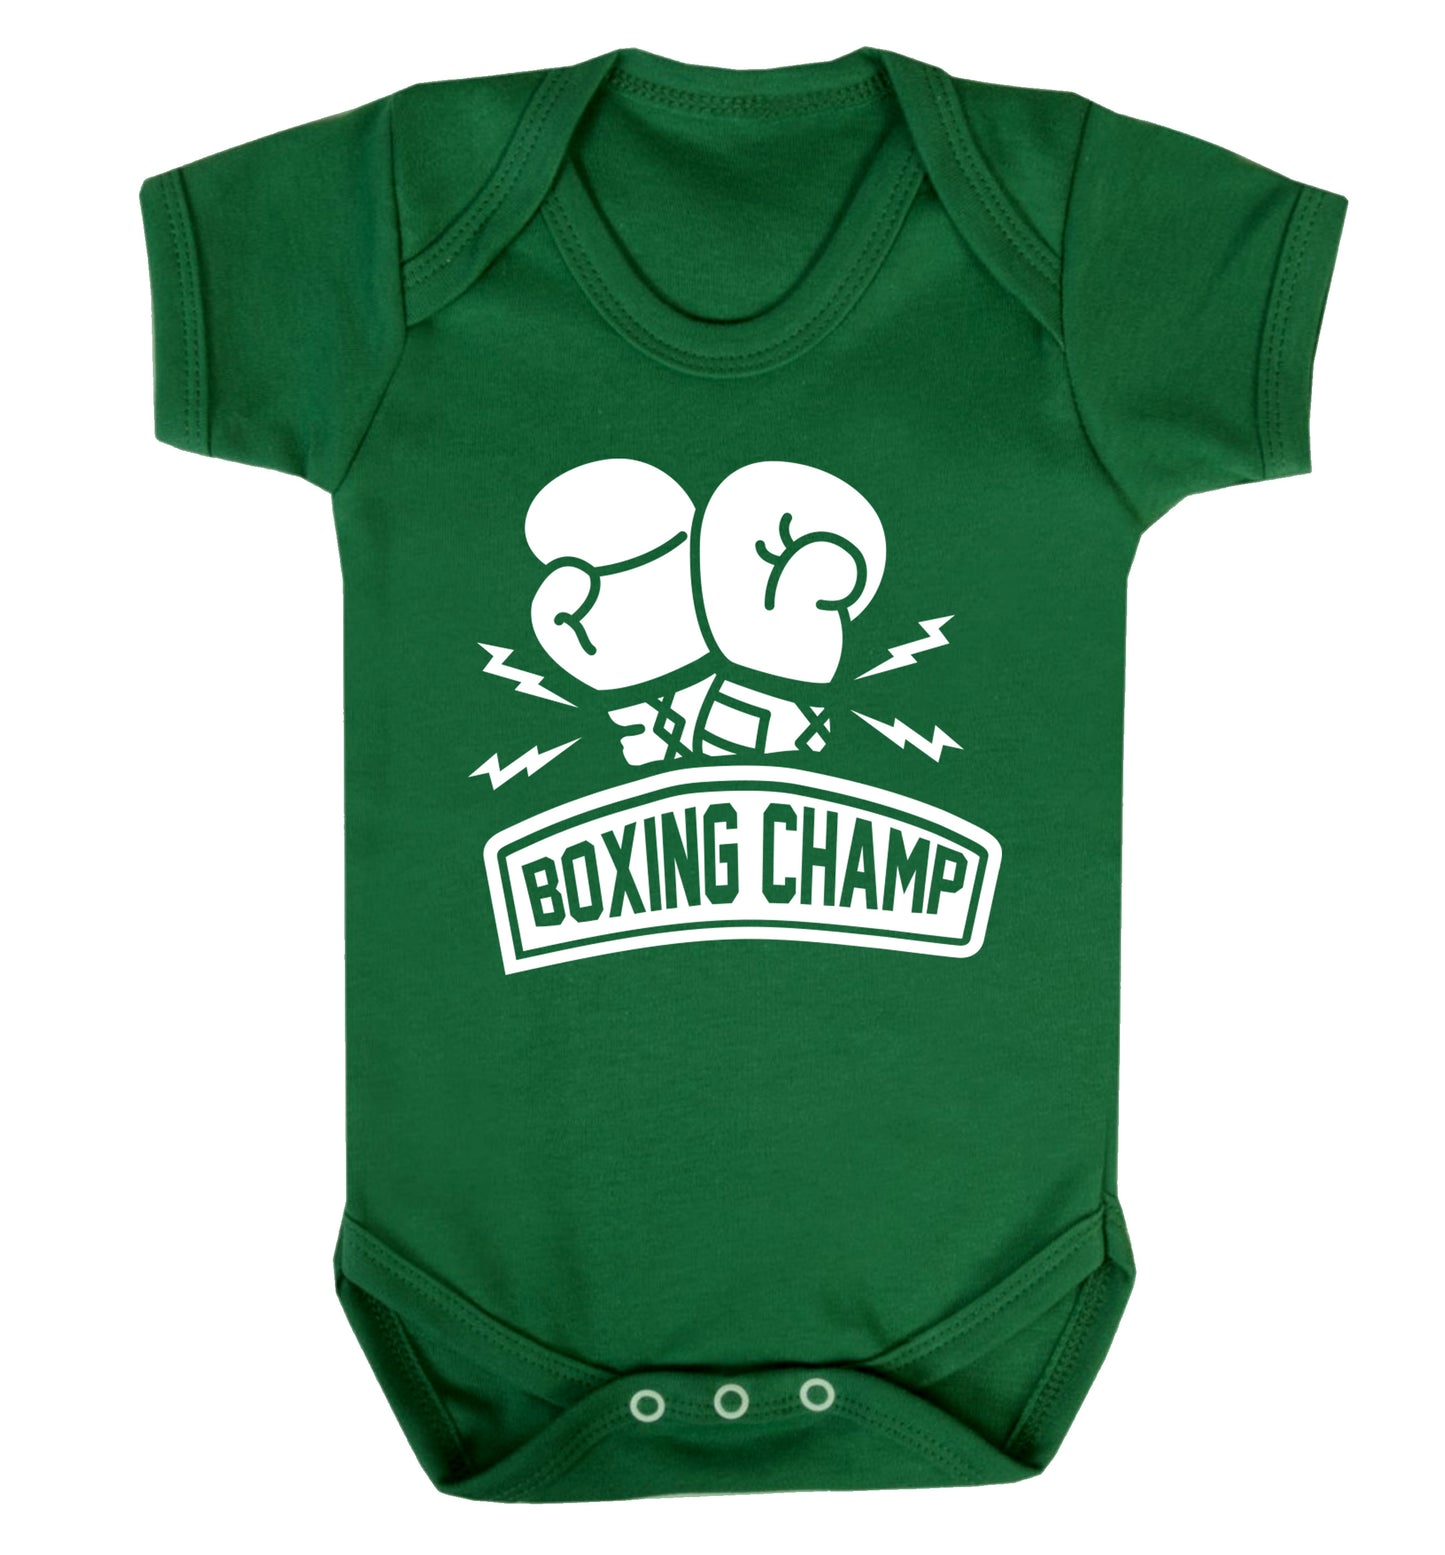 Boxing Champ Baby Vest green 18-24 months